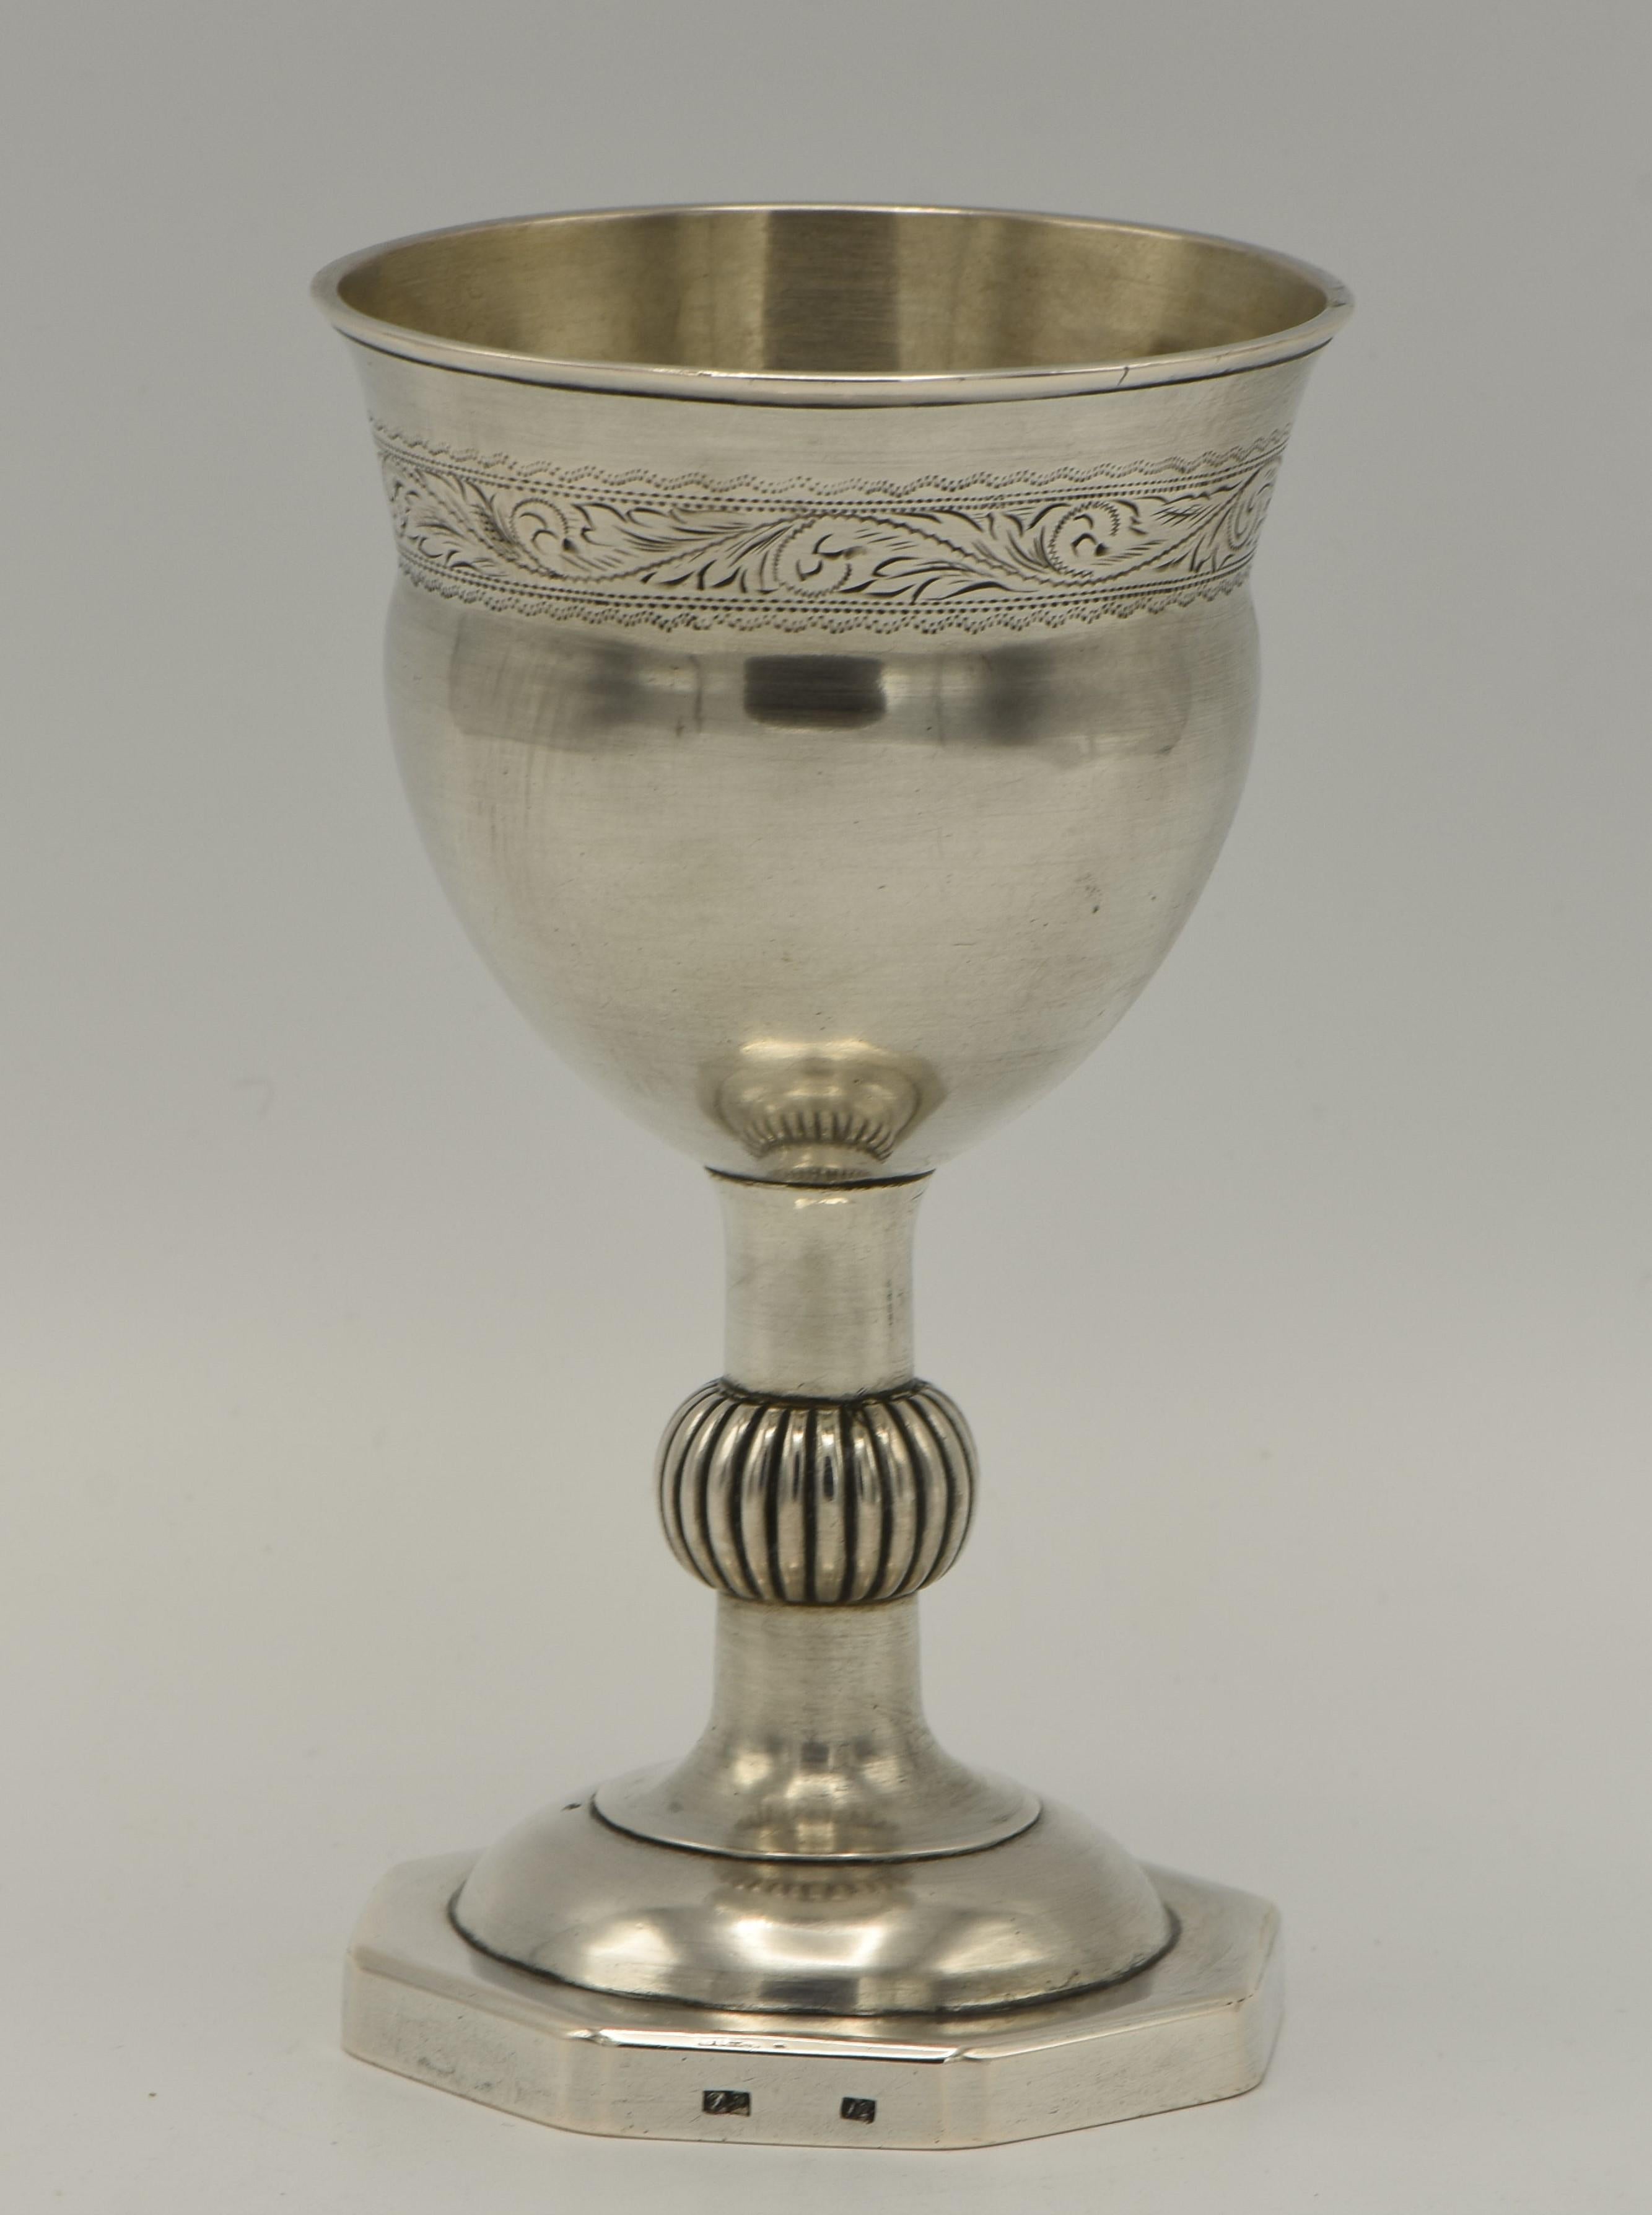 Handmade silver Kiddush goblet, Poland, circa 1820. 
Large upper portion engraved with floral decoration, set on a bulbous scroll stem on a octagonal base. Clearly struck with the quality mark 12 and maker A.G.

Kiddush cup is a ceremonial vessel to